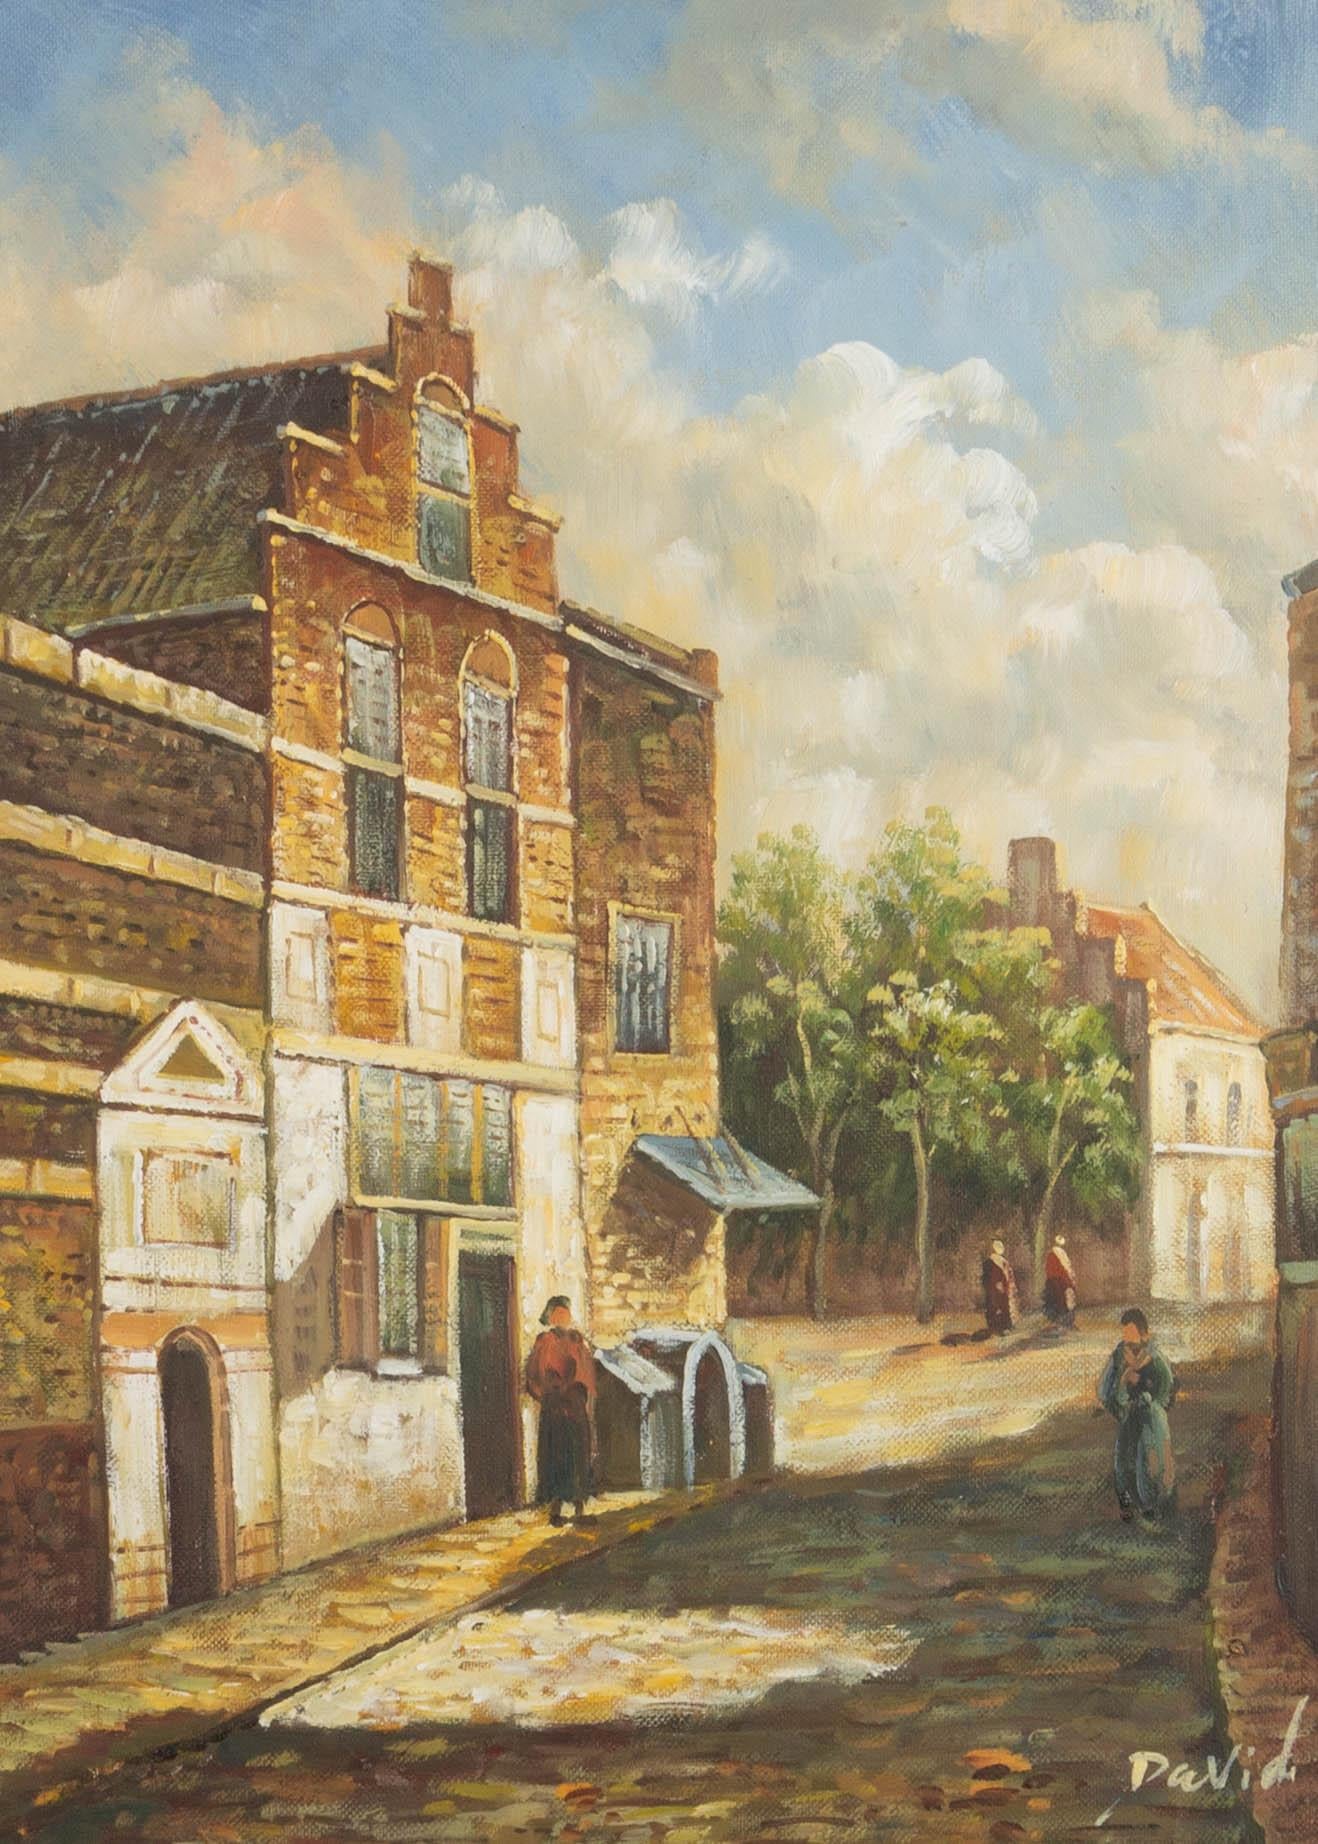 A historical scene on a Dutch street. Presented in a substantial black and gilt-effect wooden frame. Signed to the lower-right edge. On canvas on stretchers.
